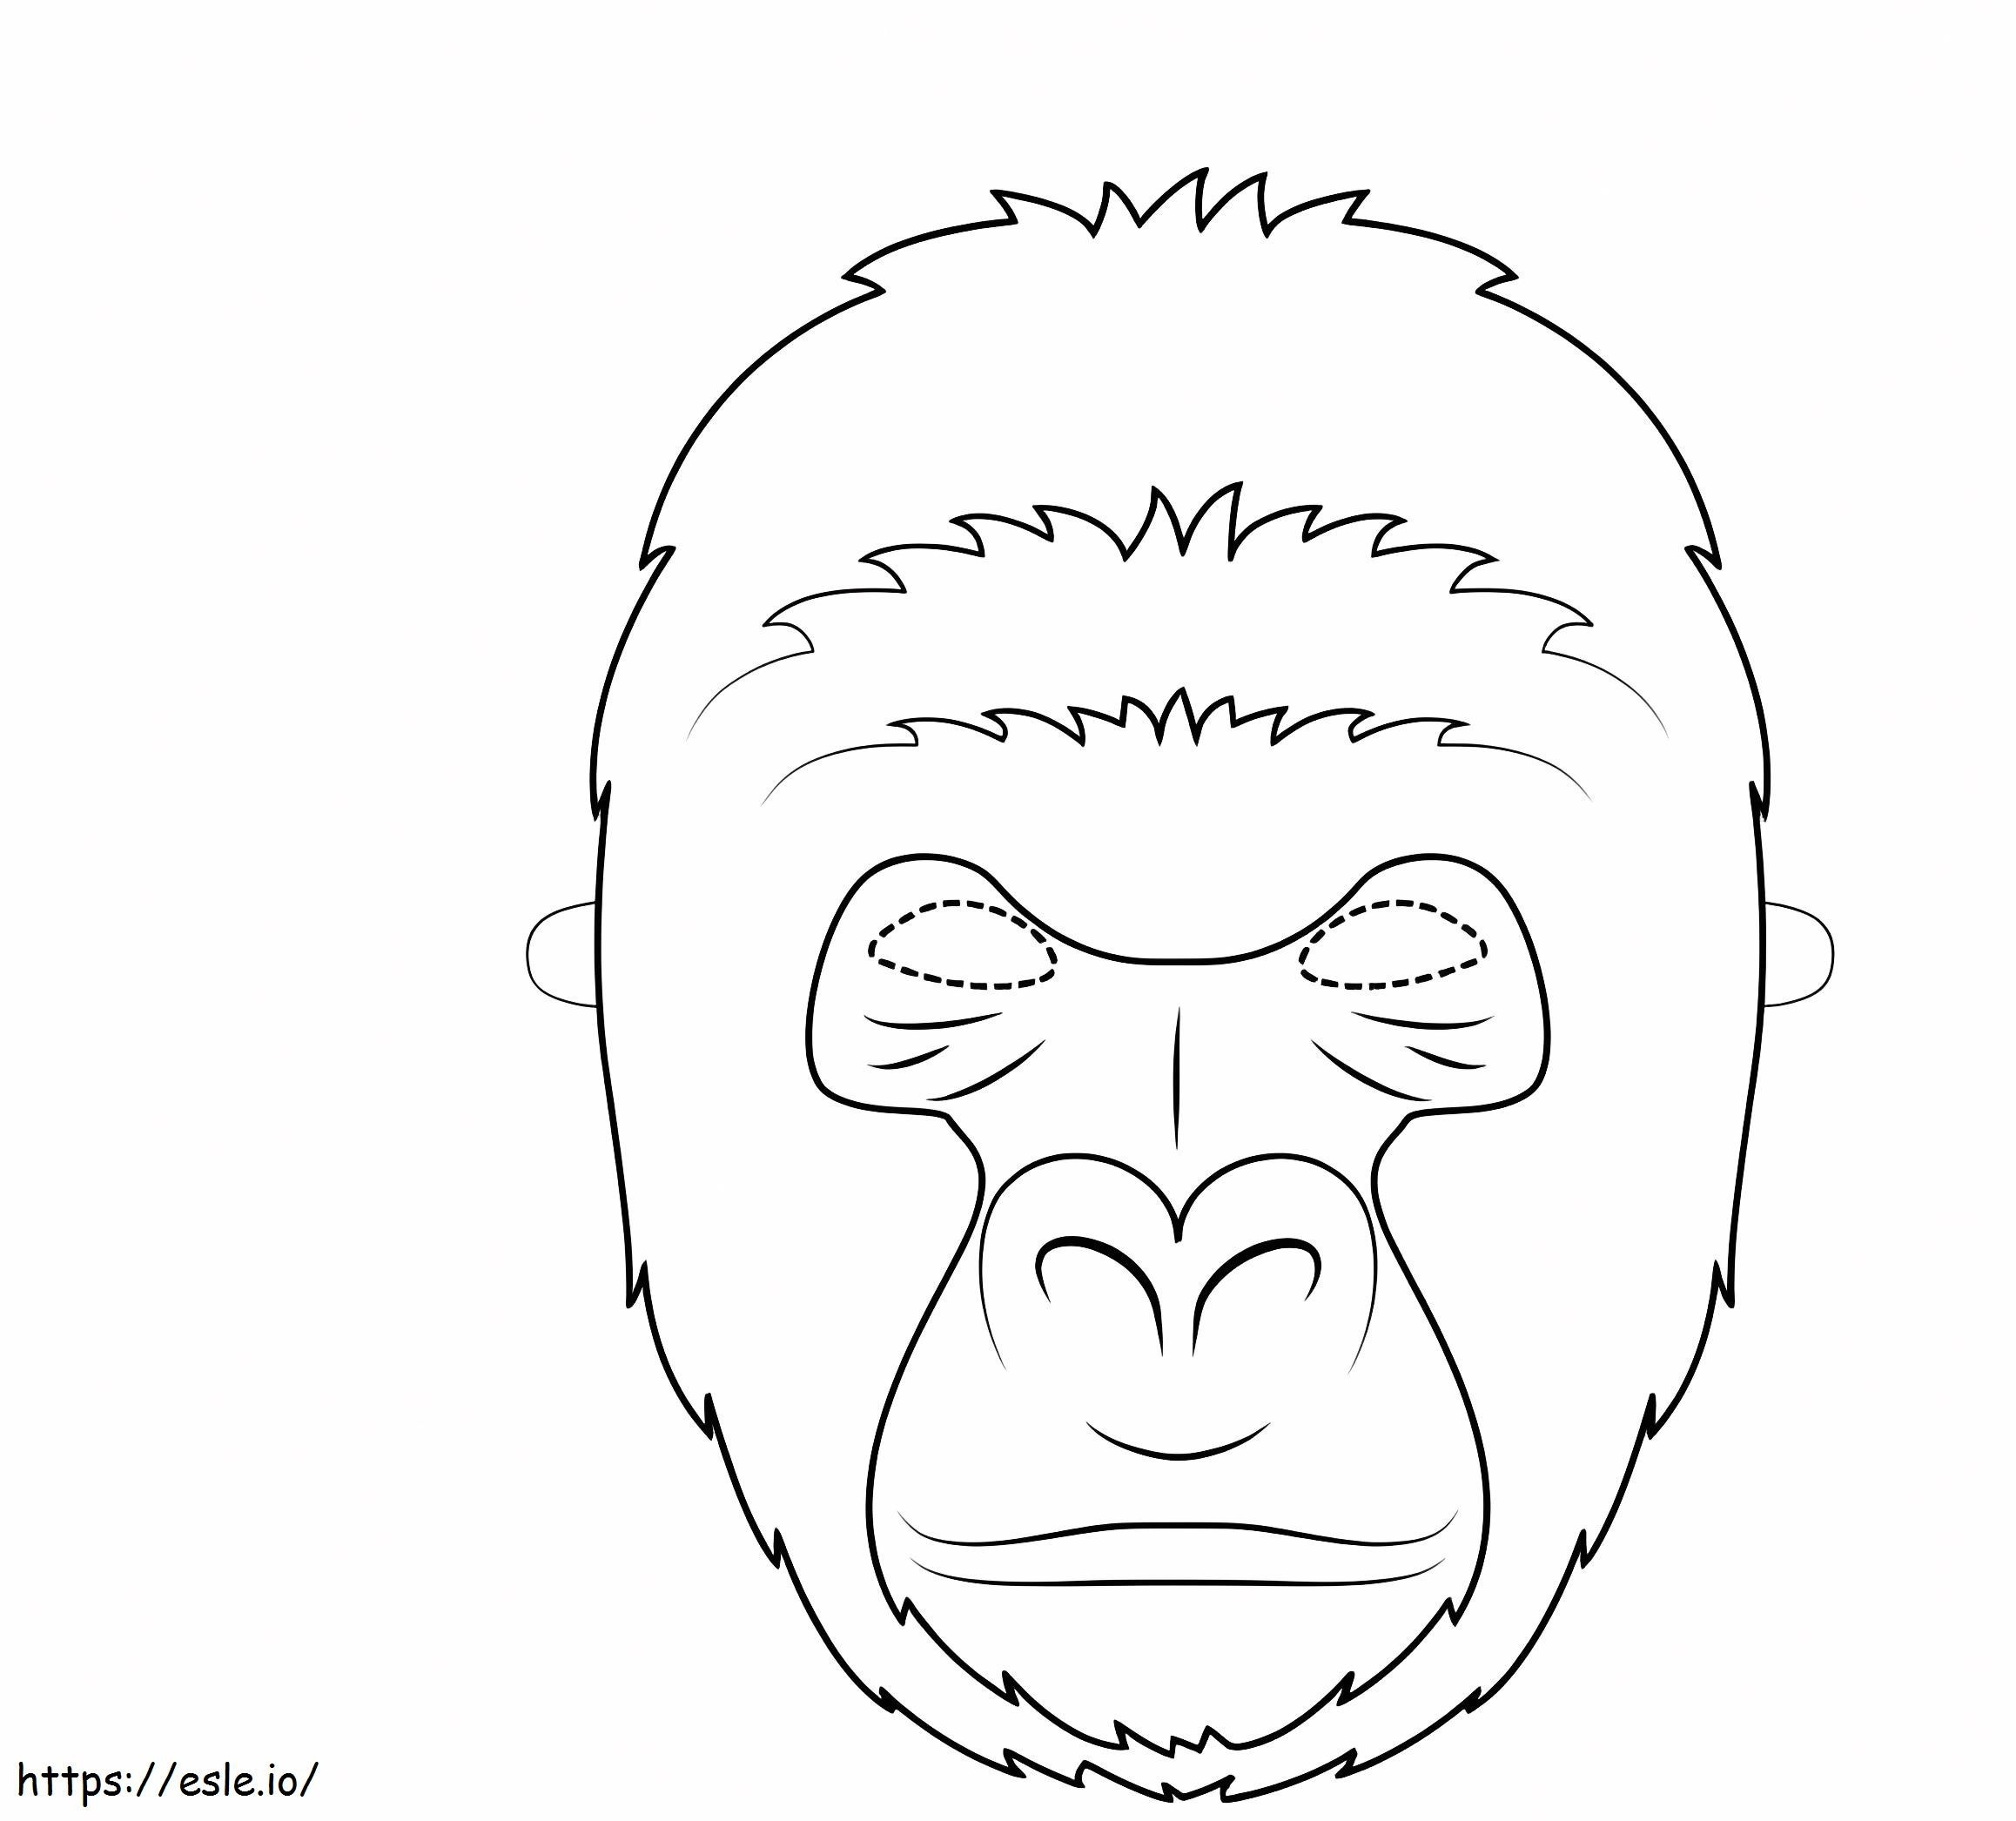 A Gorilla Mask coloring page